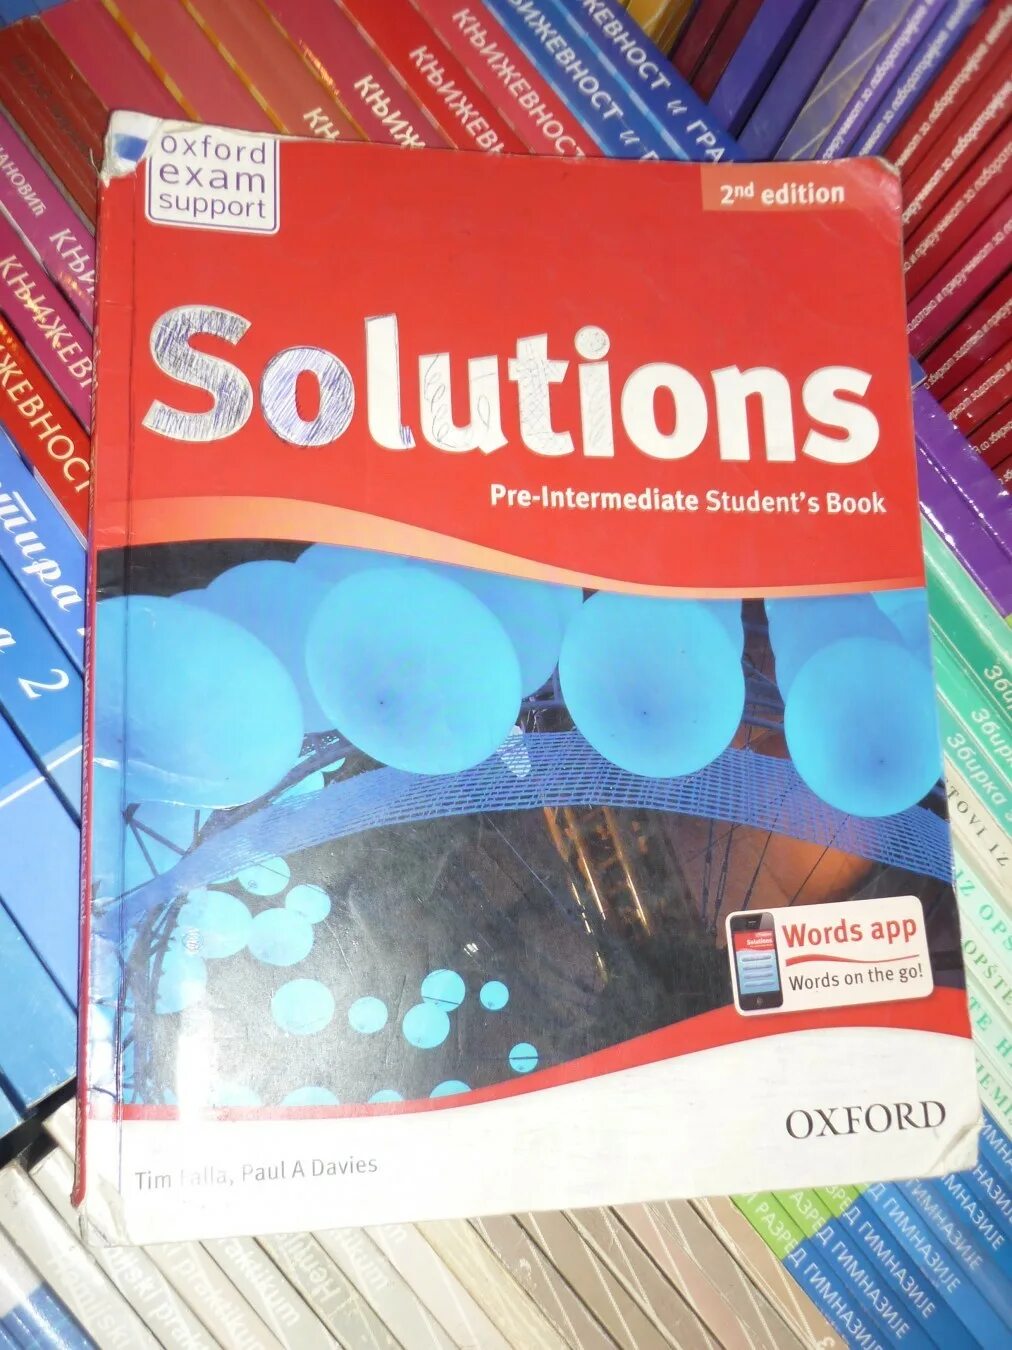 Solutions pre intermediate students book ответы. Солюшенс 2nd Edition pre Intermediate. Solutions pre-Intermediate student's book. Solutions pre-Intermediate student's book пдф. Solutions pre-Intermediate Workbook Audio 1.03.